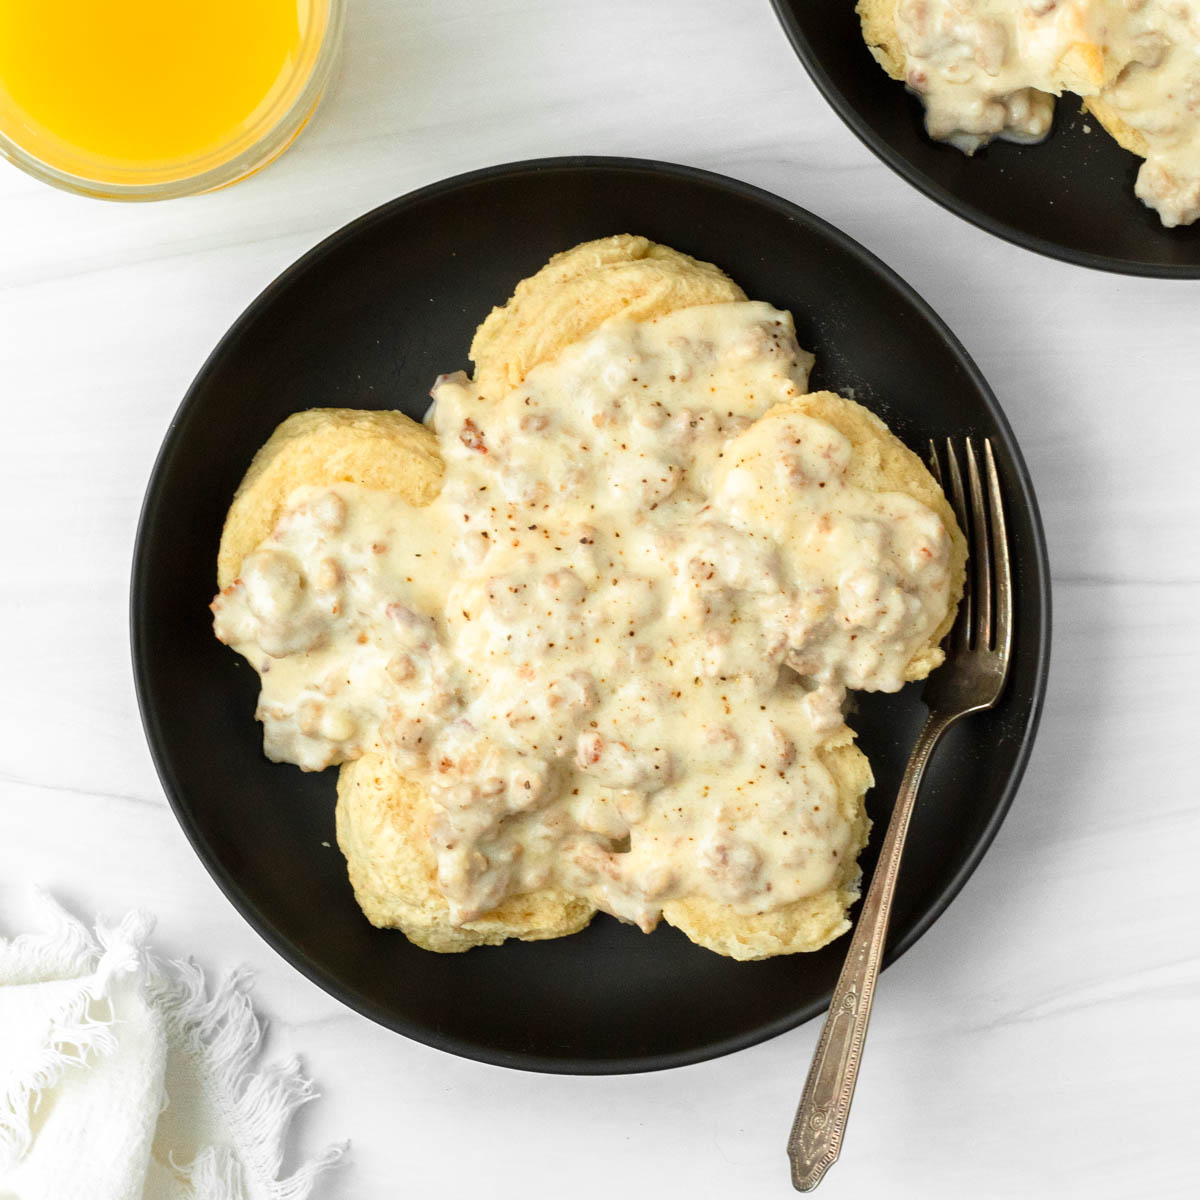 This biscuits and gravy recipe is a classic comfort food breakfast recipe made with a thick sausage gravy served over flaky buttery biscuits.